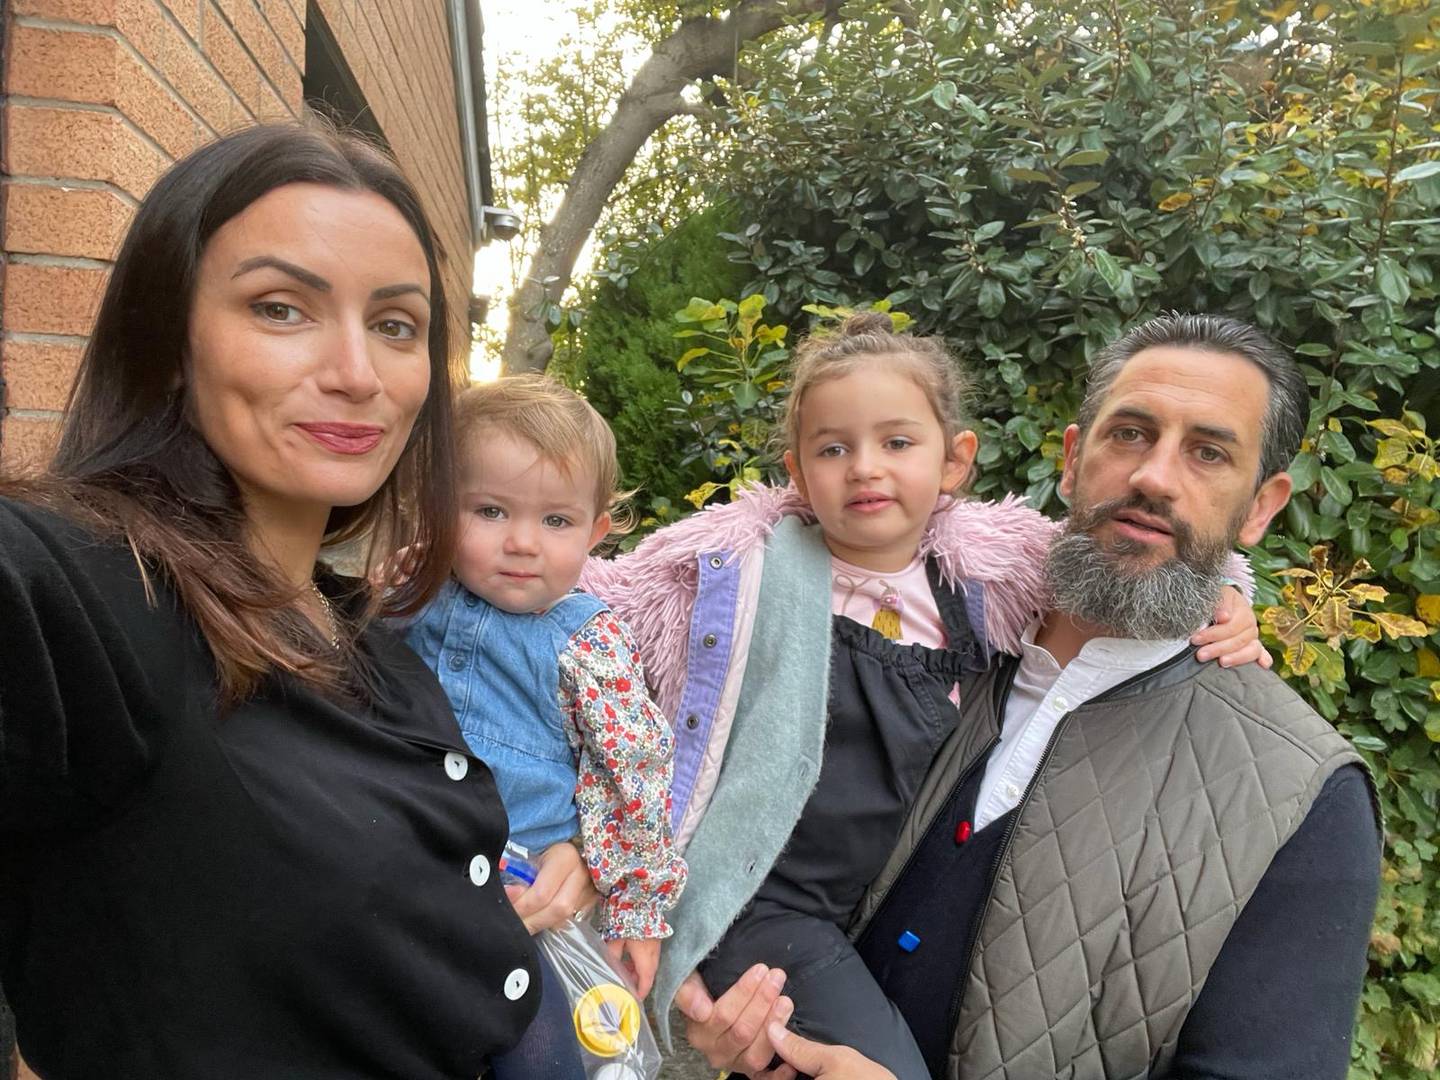 Louise Duffy, husband Paul Galvin and their two daughters, Ésme and Elin